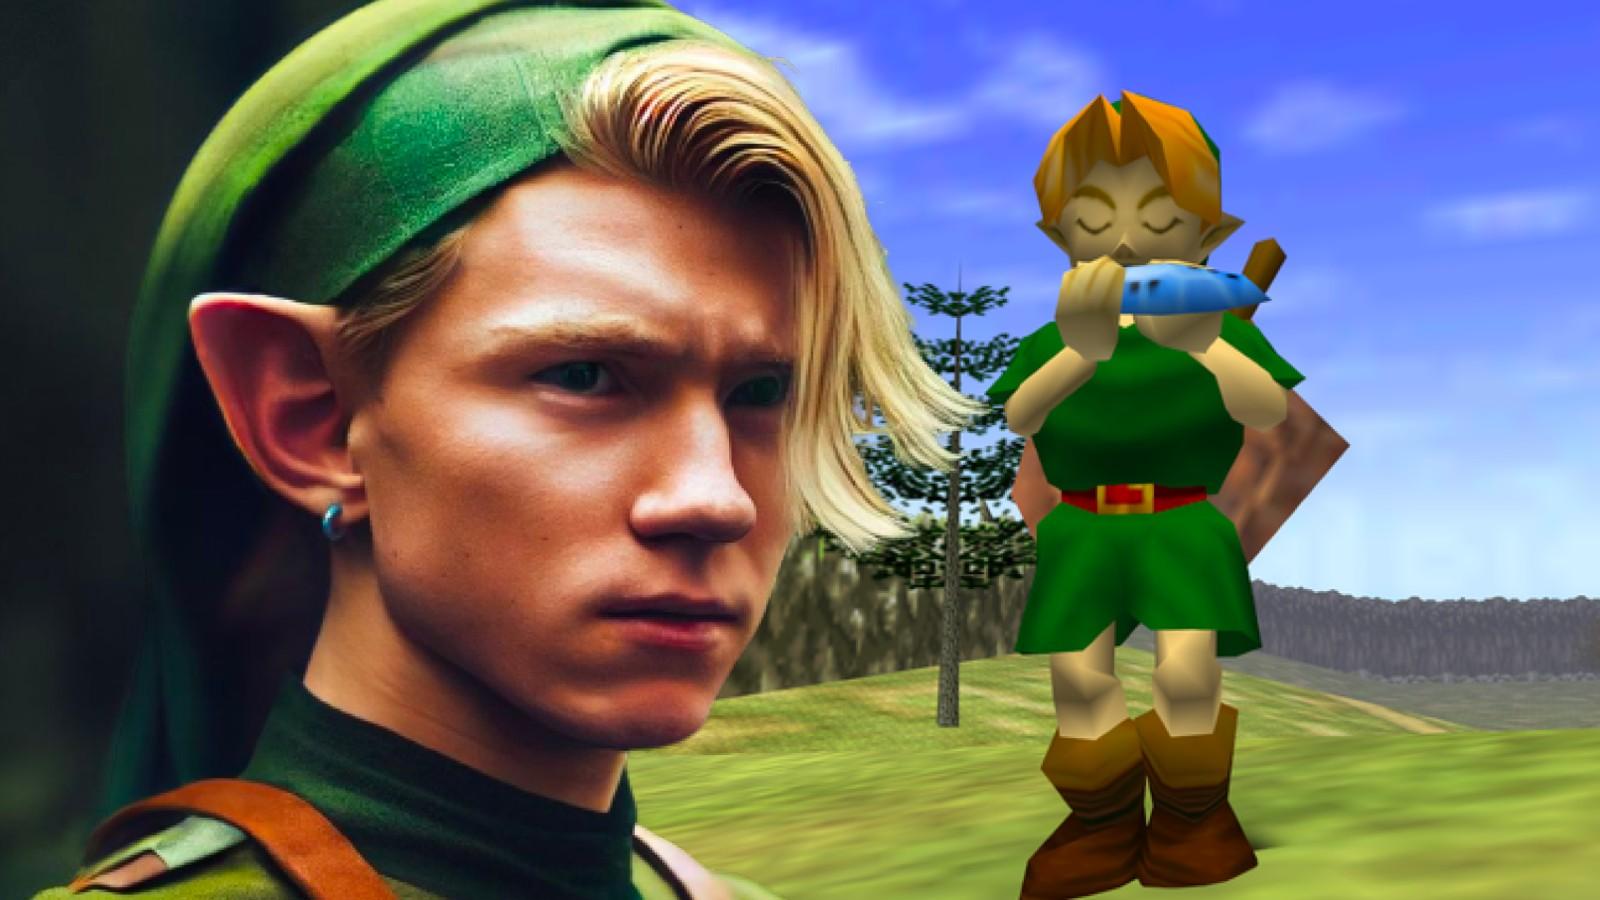 Tom Holland as Link in Zelda concept art and an image from Ocarina of Time